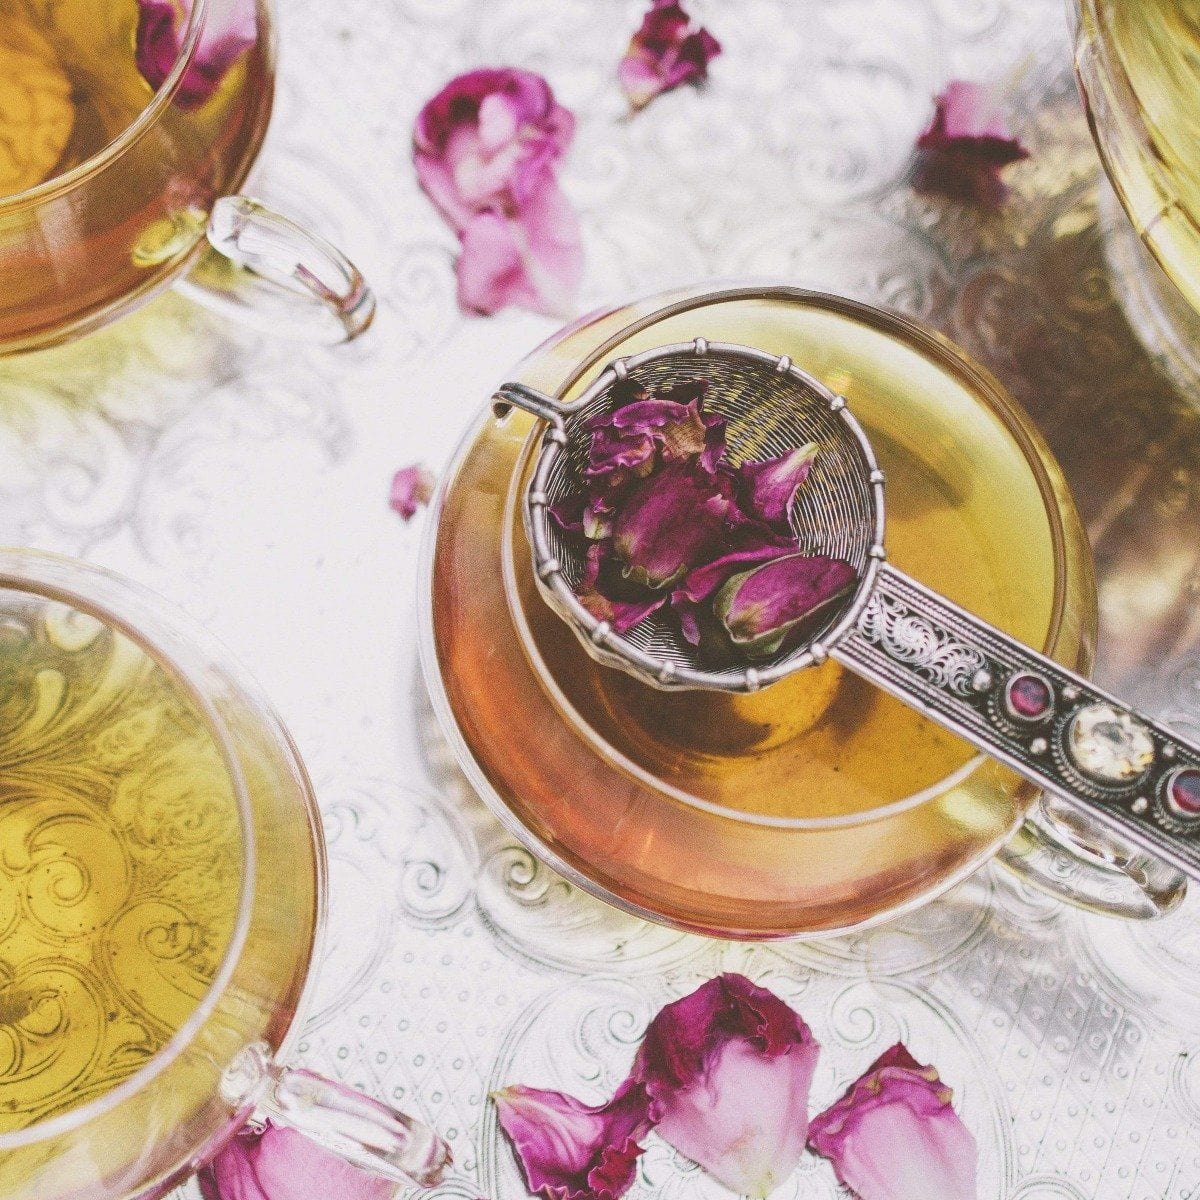 A close-up of three tea cups filled with light brown Wild Indian Roses by Magic Hour, placed on an ornate silver tray. Rose petals are scattered around and one silver strainer filled with rose petals rests on top of one cup. The scene has a delicate, elegant feel, embodying the essence of fine Organic Tea.